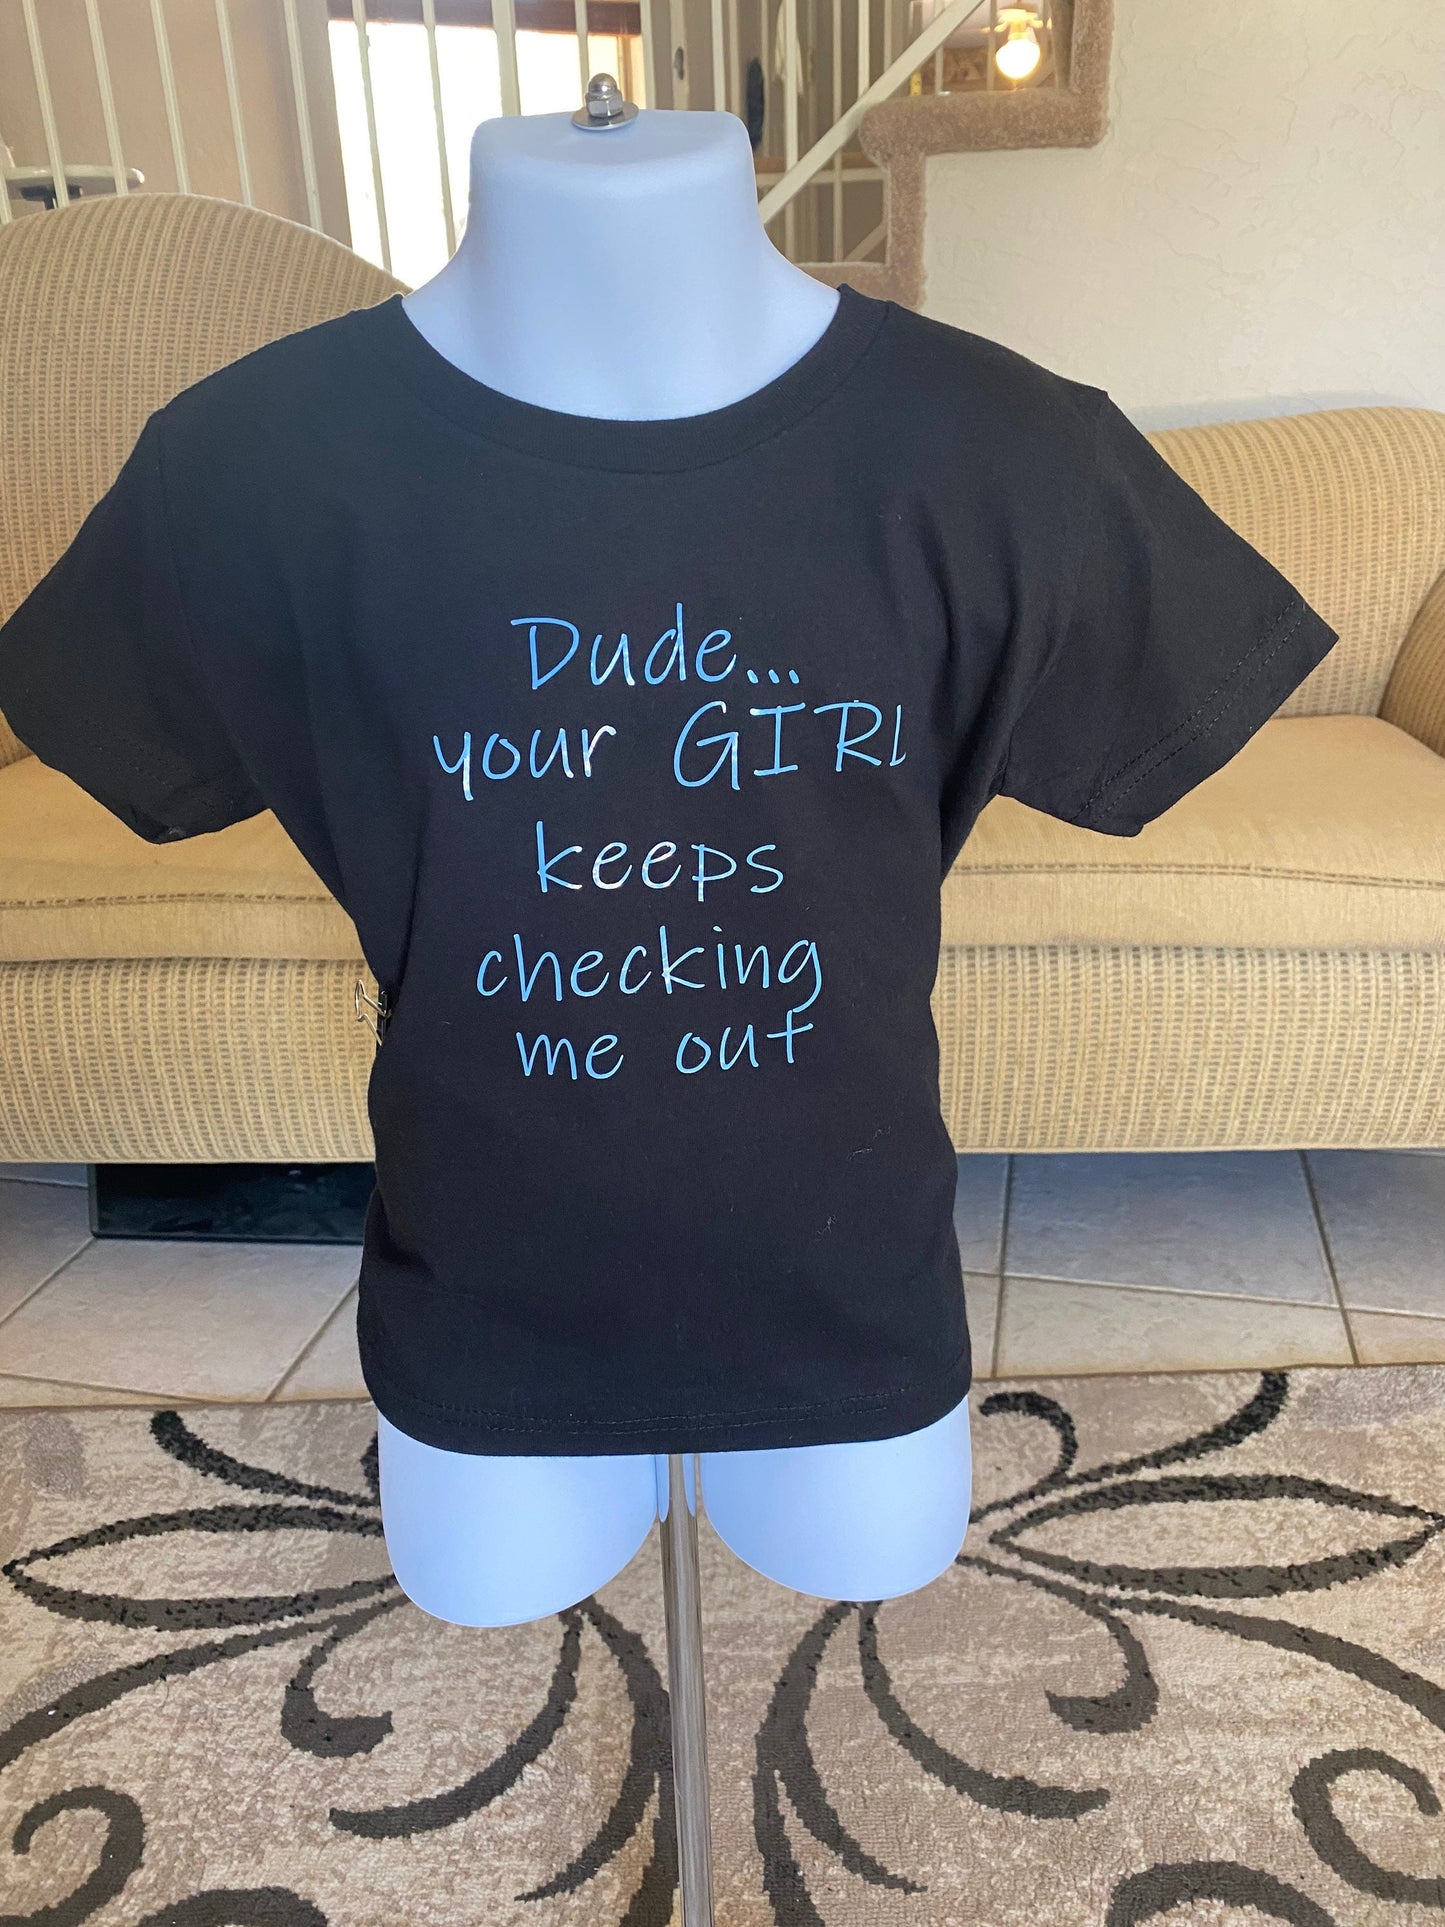 Dude Your GIRL keeps checking me out/funny shirt/funny tshirt/ funny t shirt / funny onesie/funny kids shirt/funnytoddlershirt/ boys gift